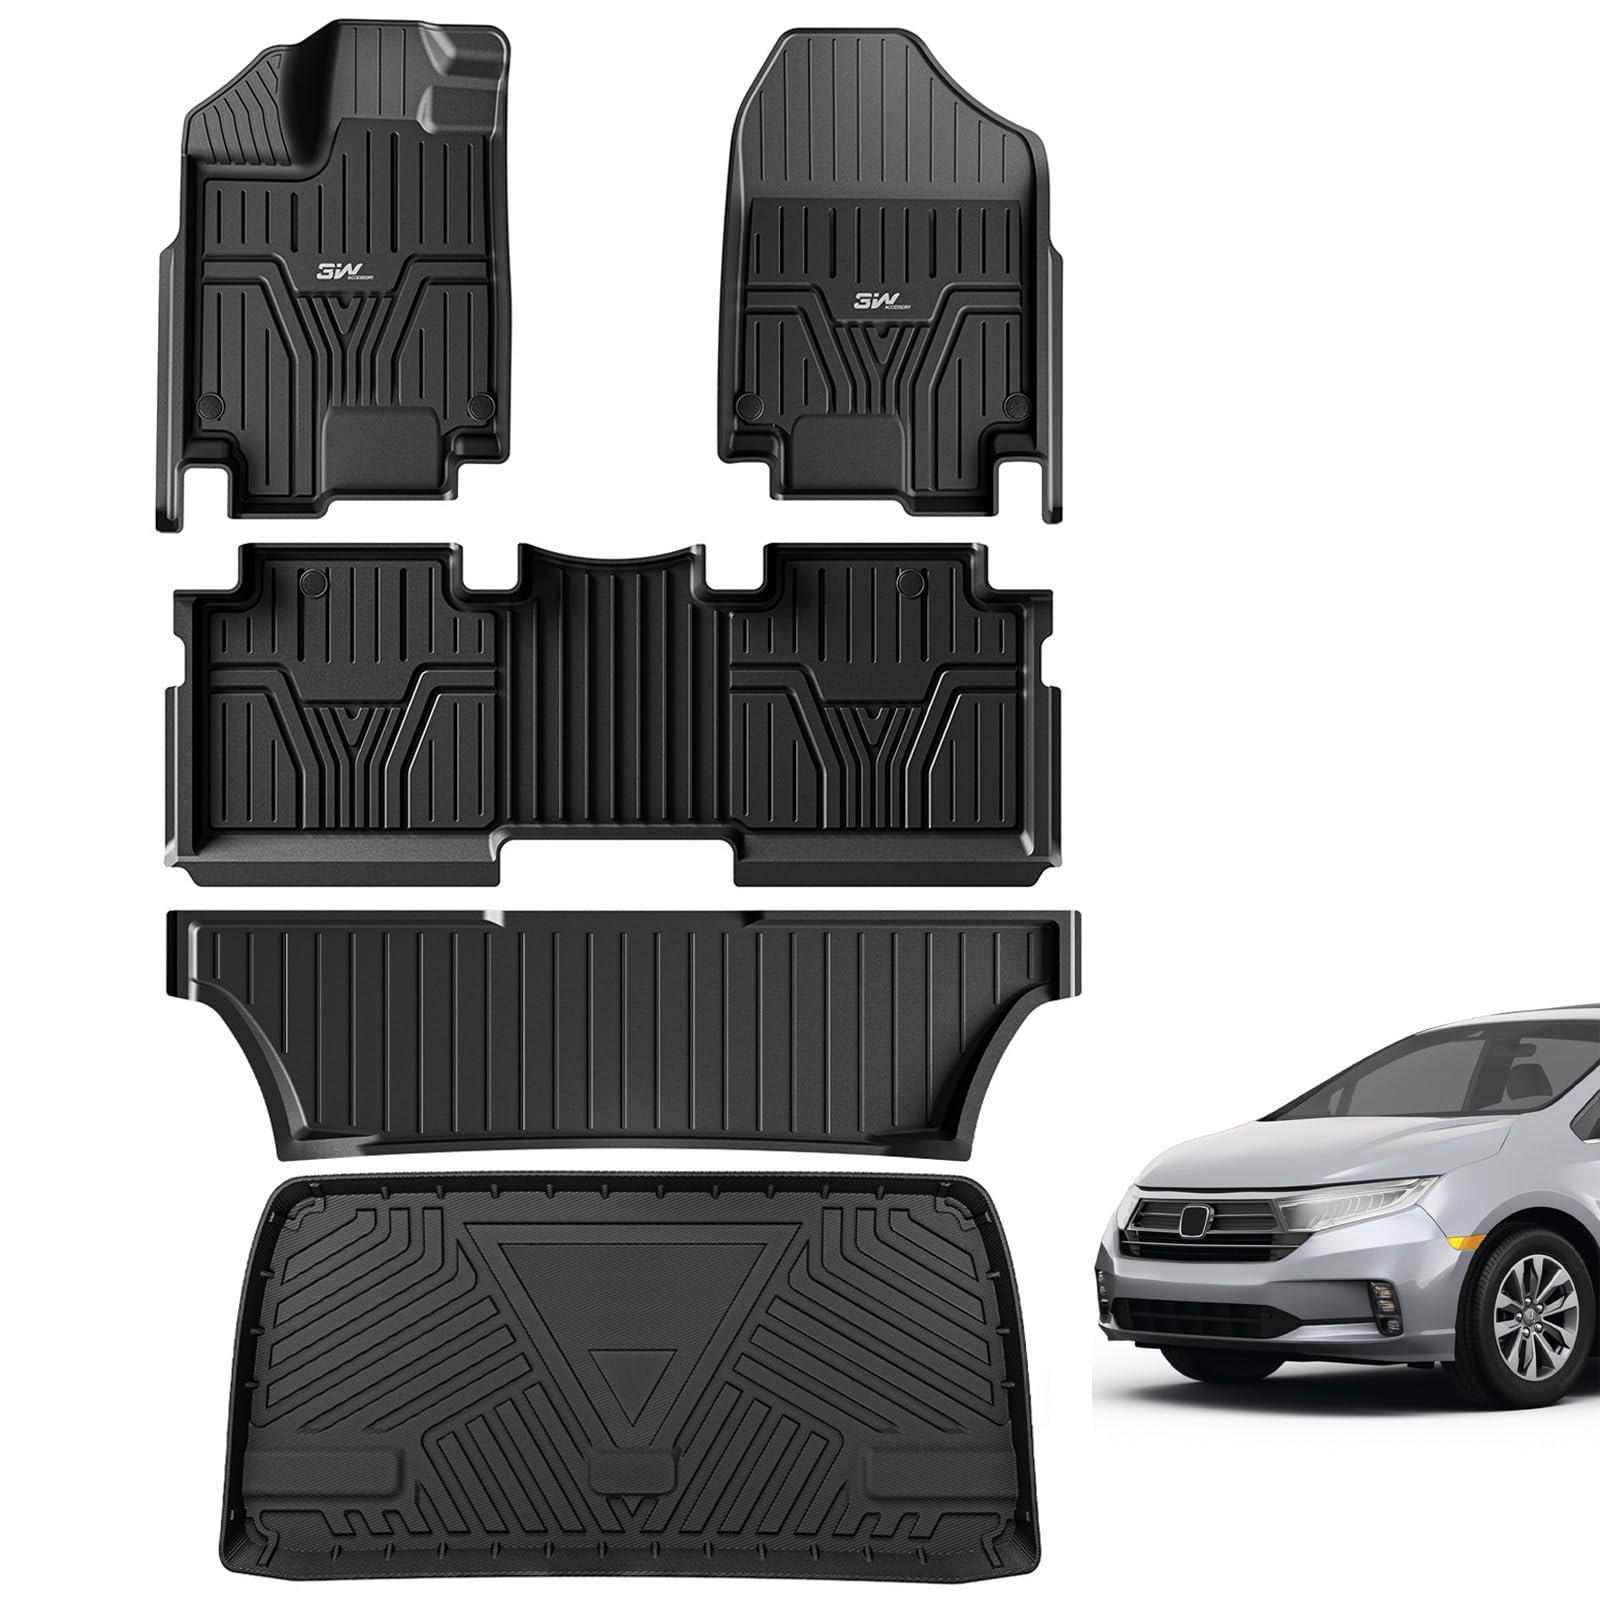 3W Honda Odyssey 2018-2024 Custom Floor Mats / Trunk Mat TPE Material & All-Weather Protection Vehicles & Parts 3W 2018-2024 Odyssey 2018-2024 1st&2nd&3rd Row+Trunk Mat